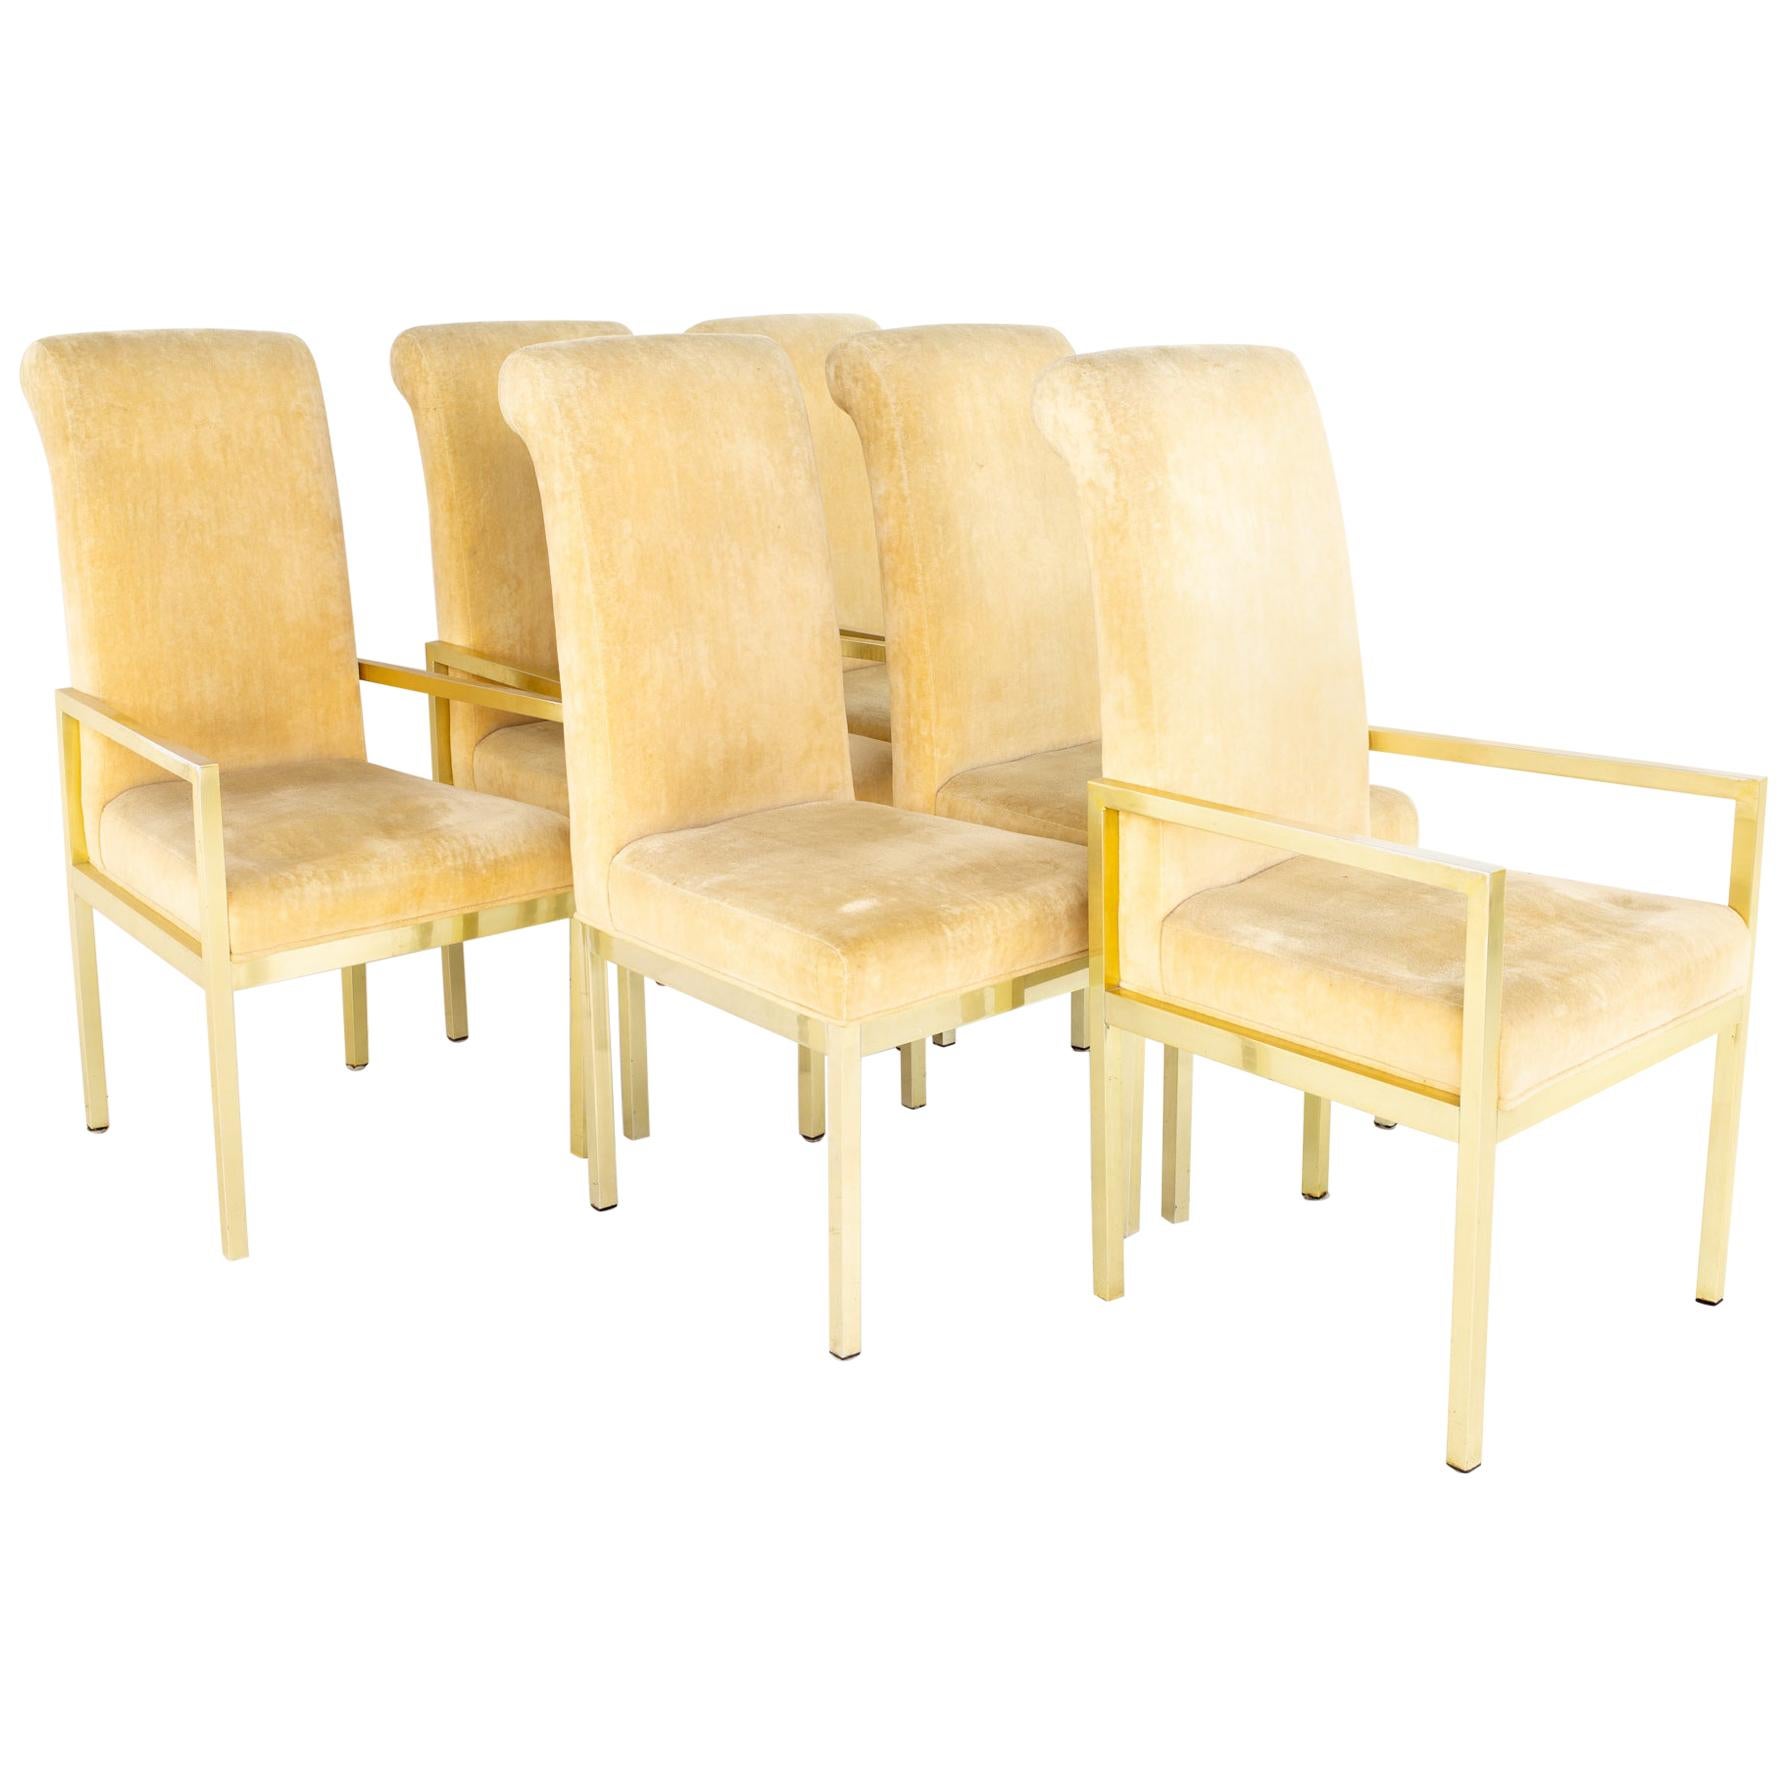 Design Institute of America MCM Brass Dining Chairs - Set of 6